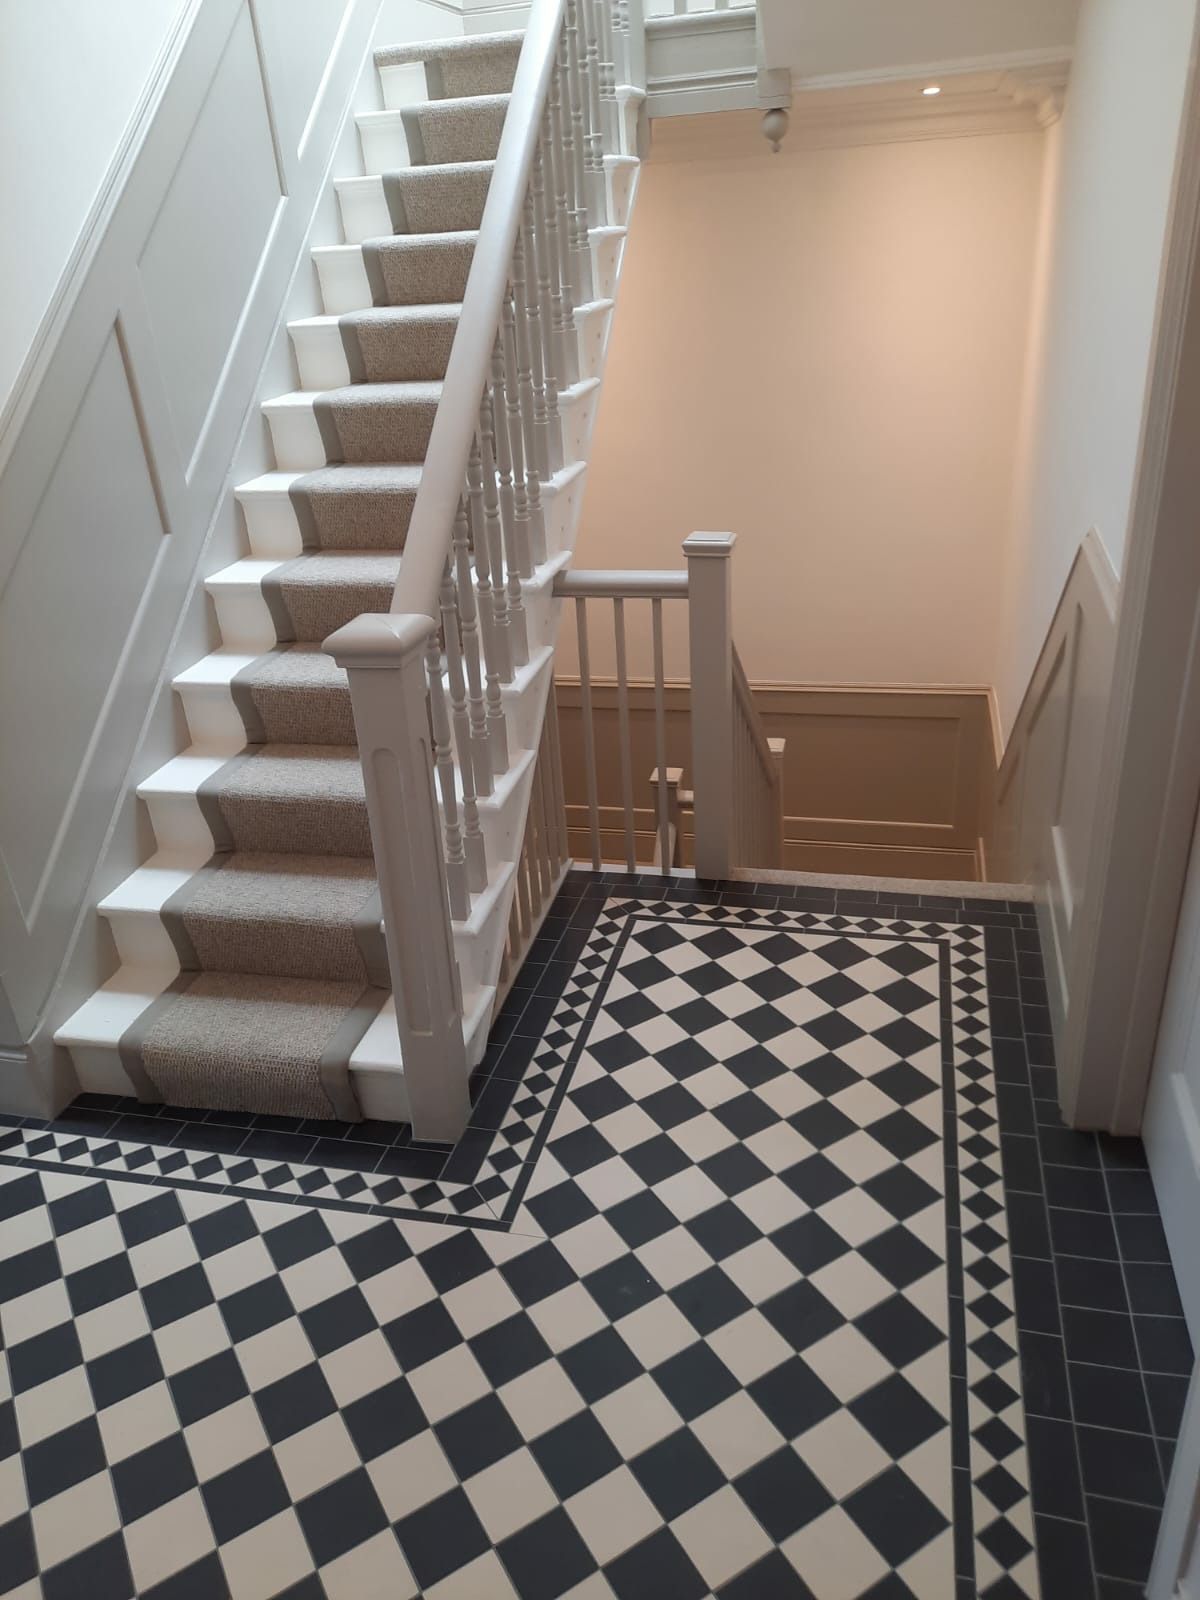 Hallway and landing of a Victorian townhouse